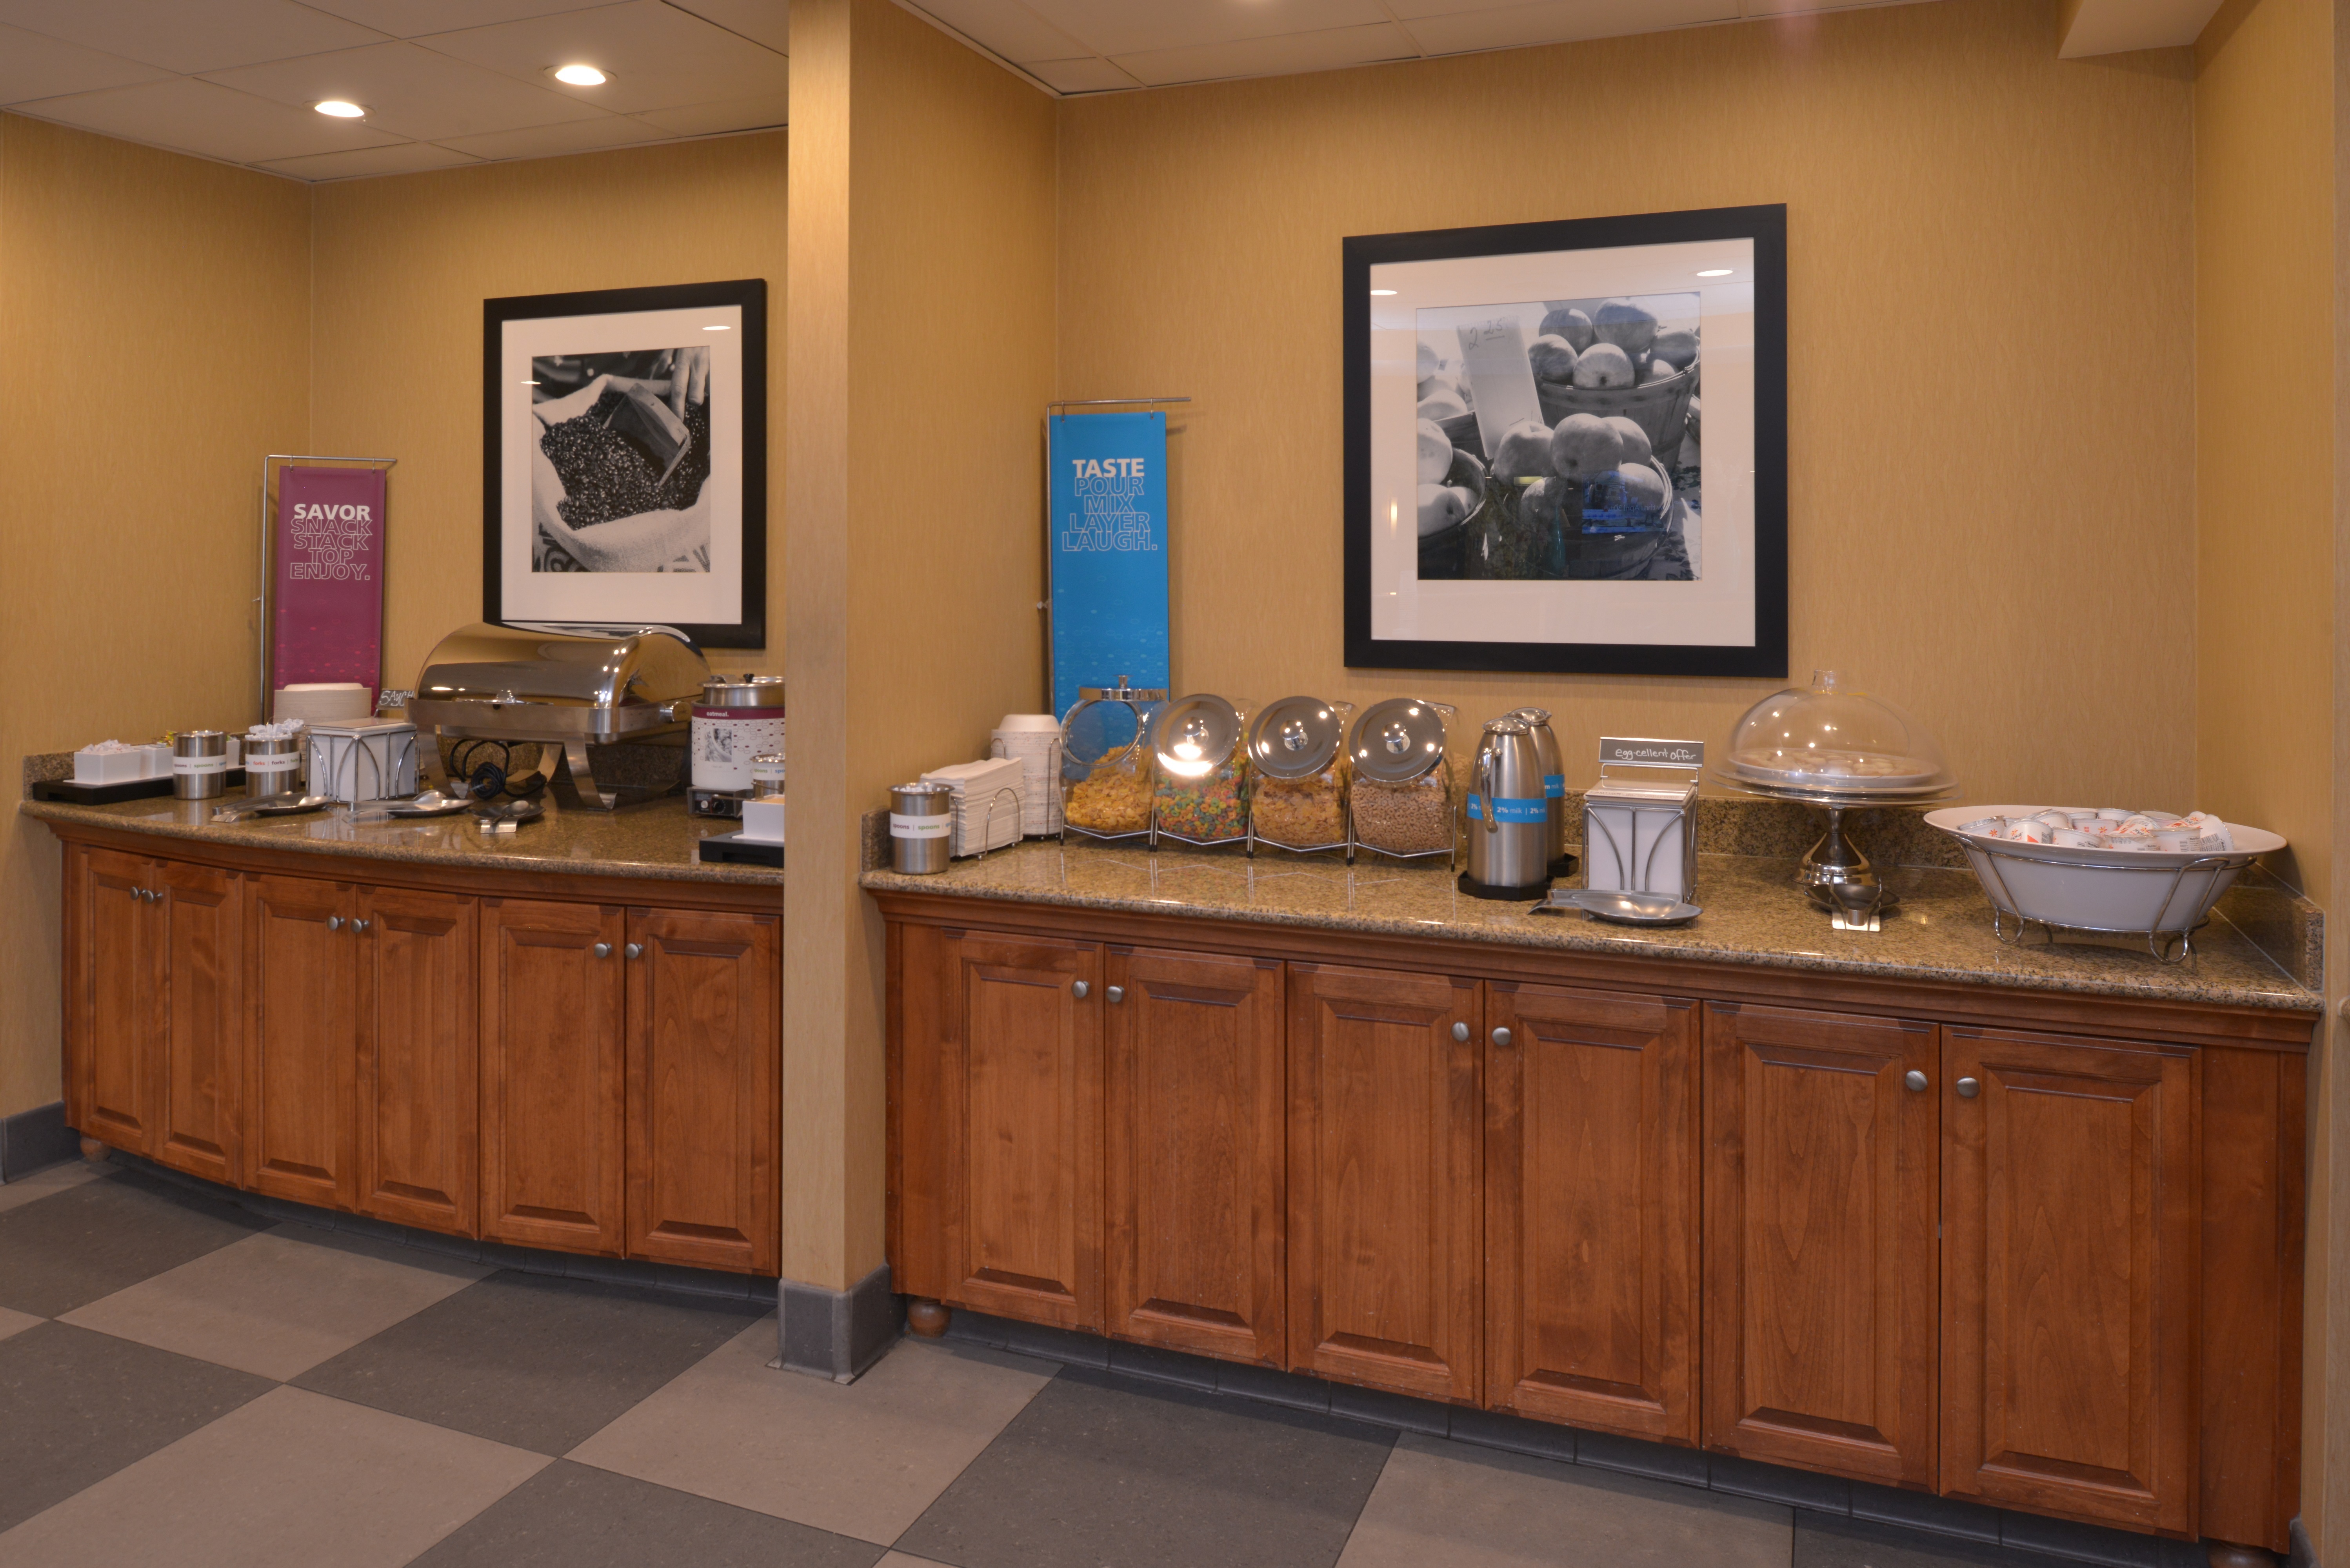 Breakfast Bar Area with Hot and Cold Foods